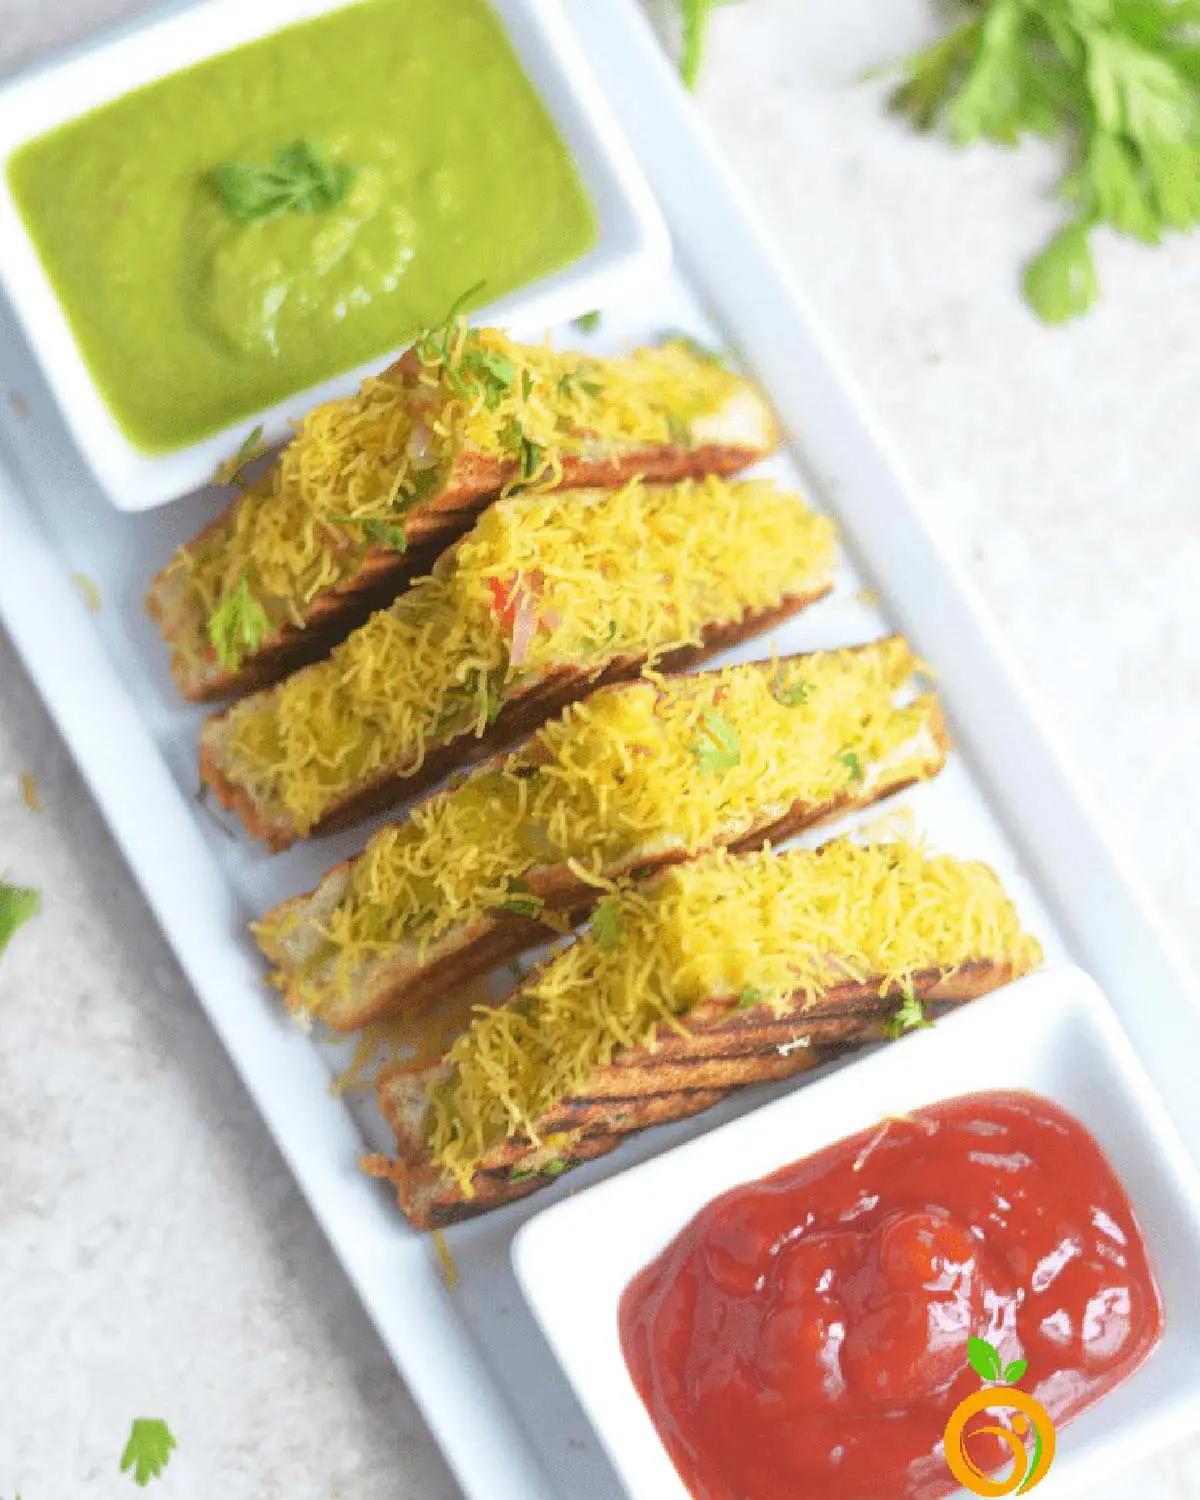 Indian-style sandwiches with sauce on a white board.